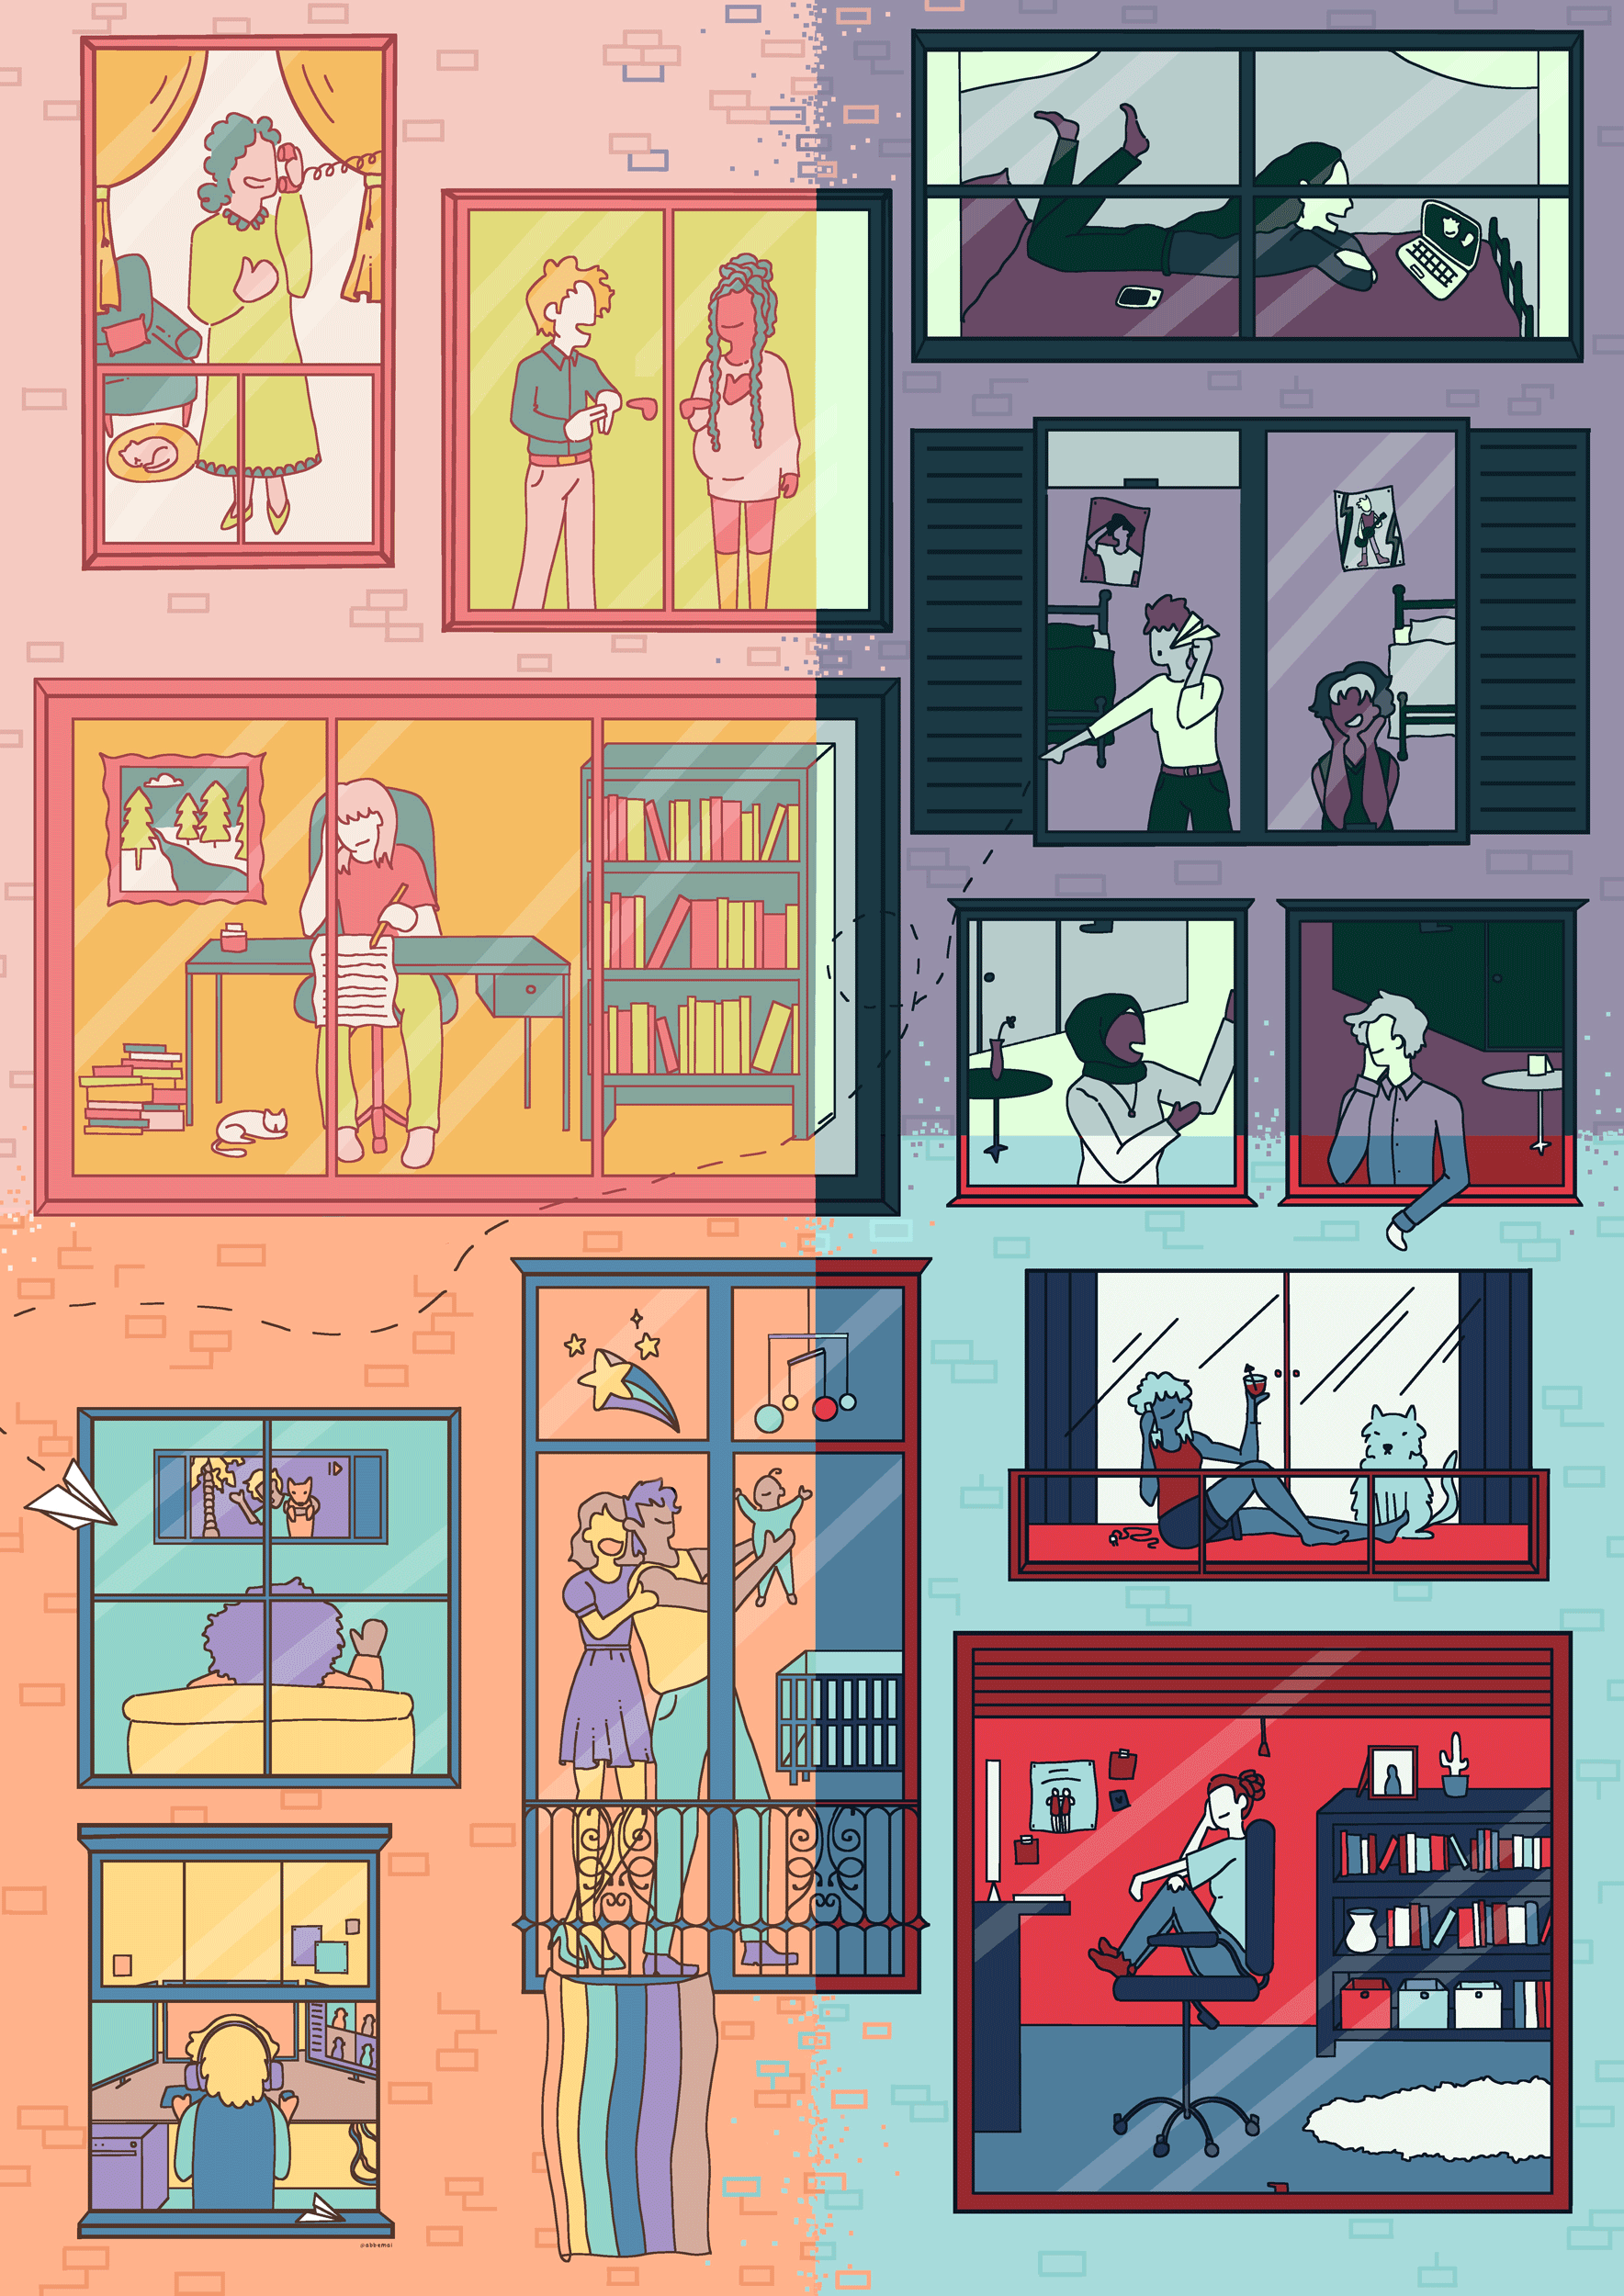 BA Illustration work by Abbie Barker showing into multiple windows in an apartment, showing different characters and different rooms, with a bright bold colour scheme.